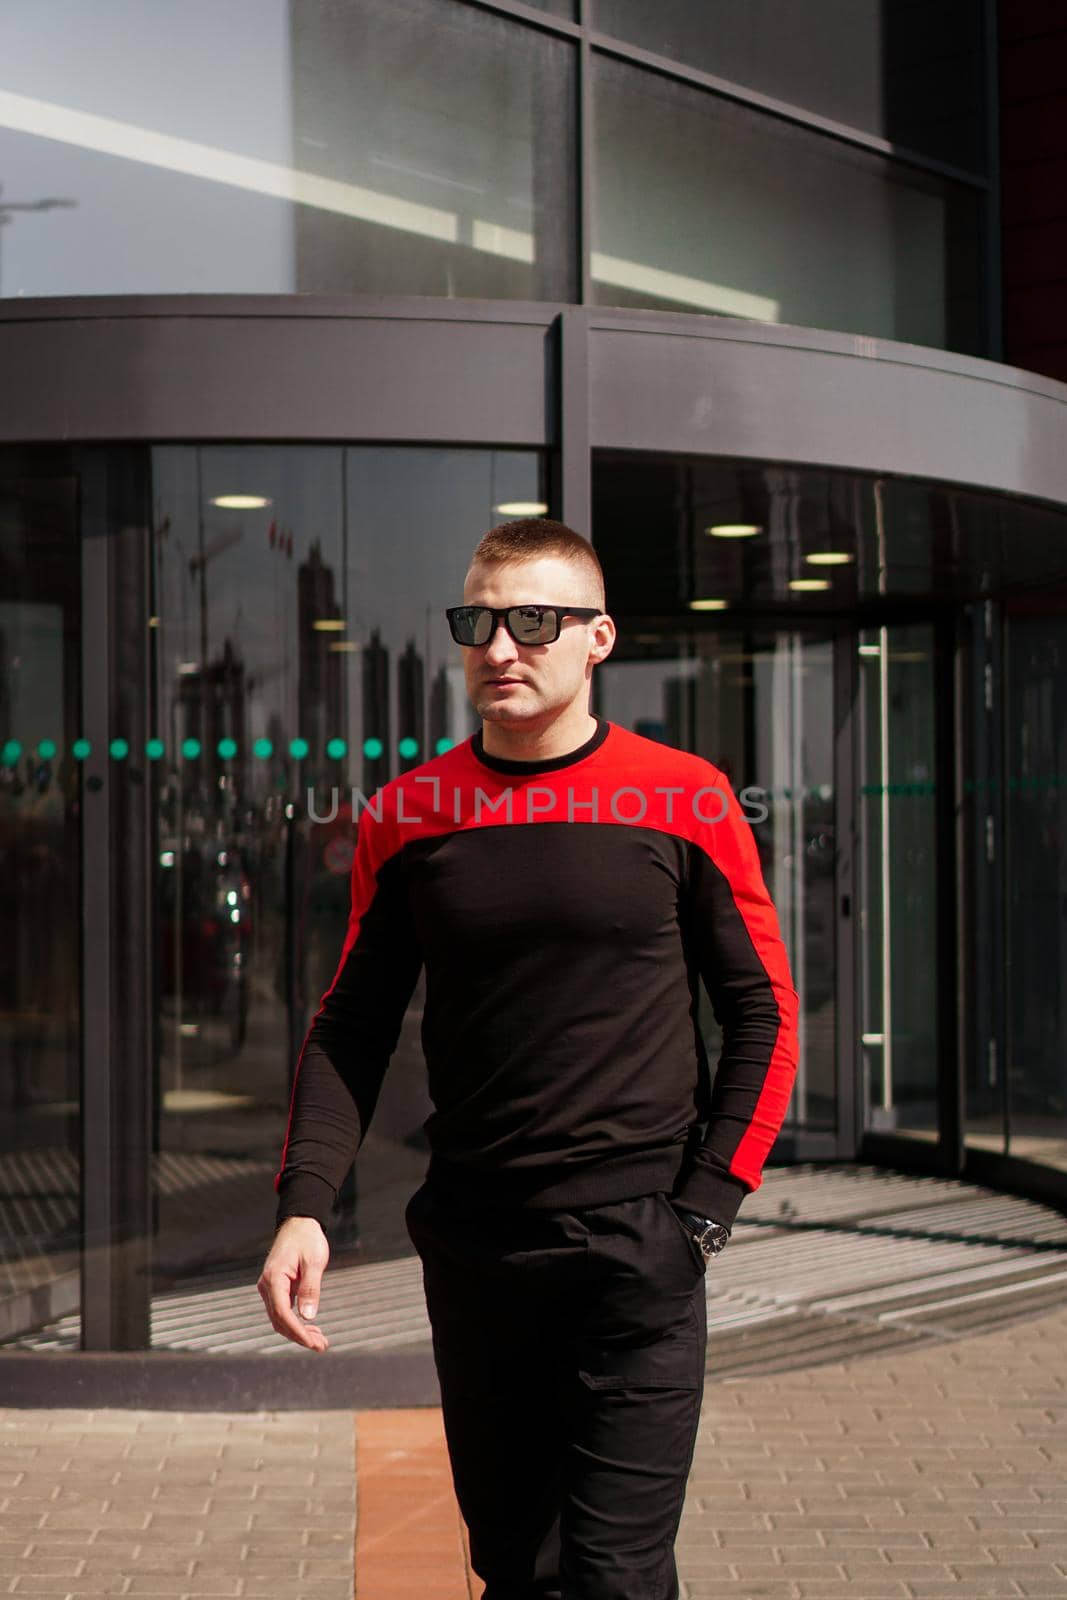 A young athletic man in sunglasses in a tracksuit walks out of the revolving doors of a hotel or shopping mall